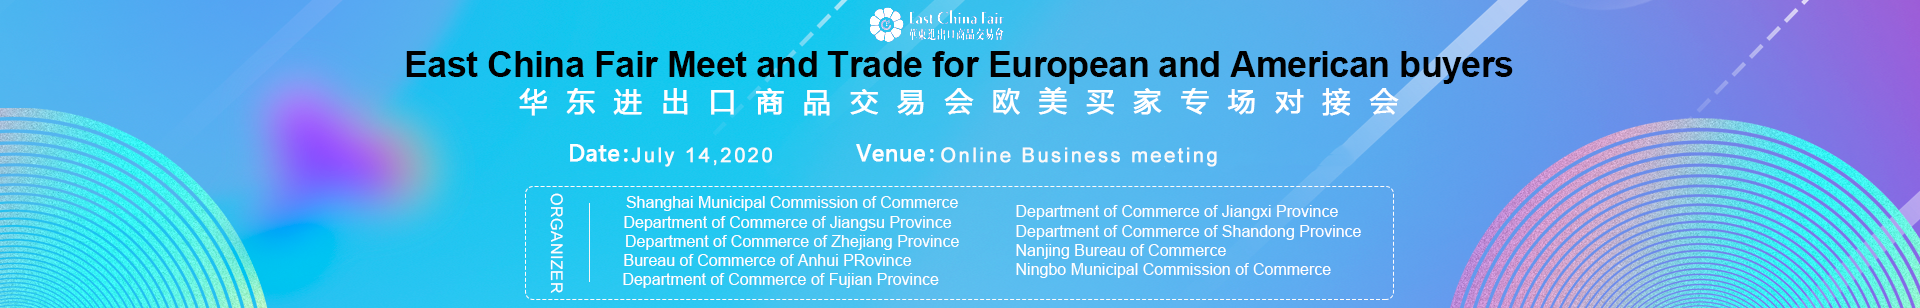 East China Fair Meet and Trade for European and American buyers  